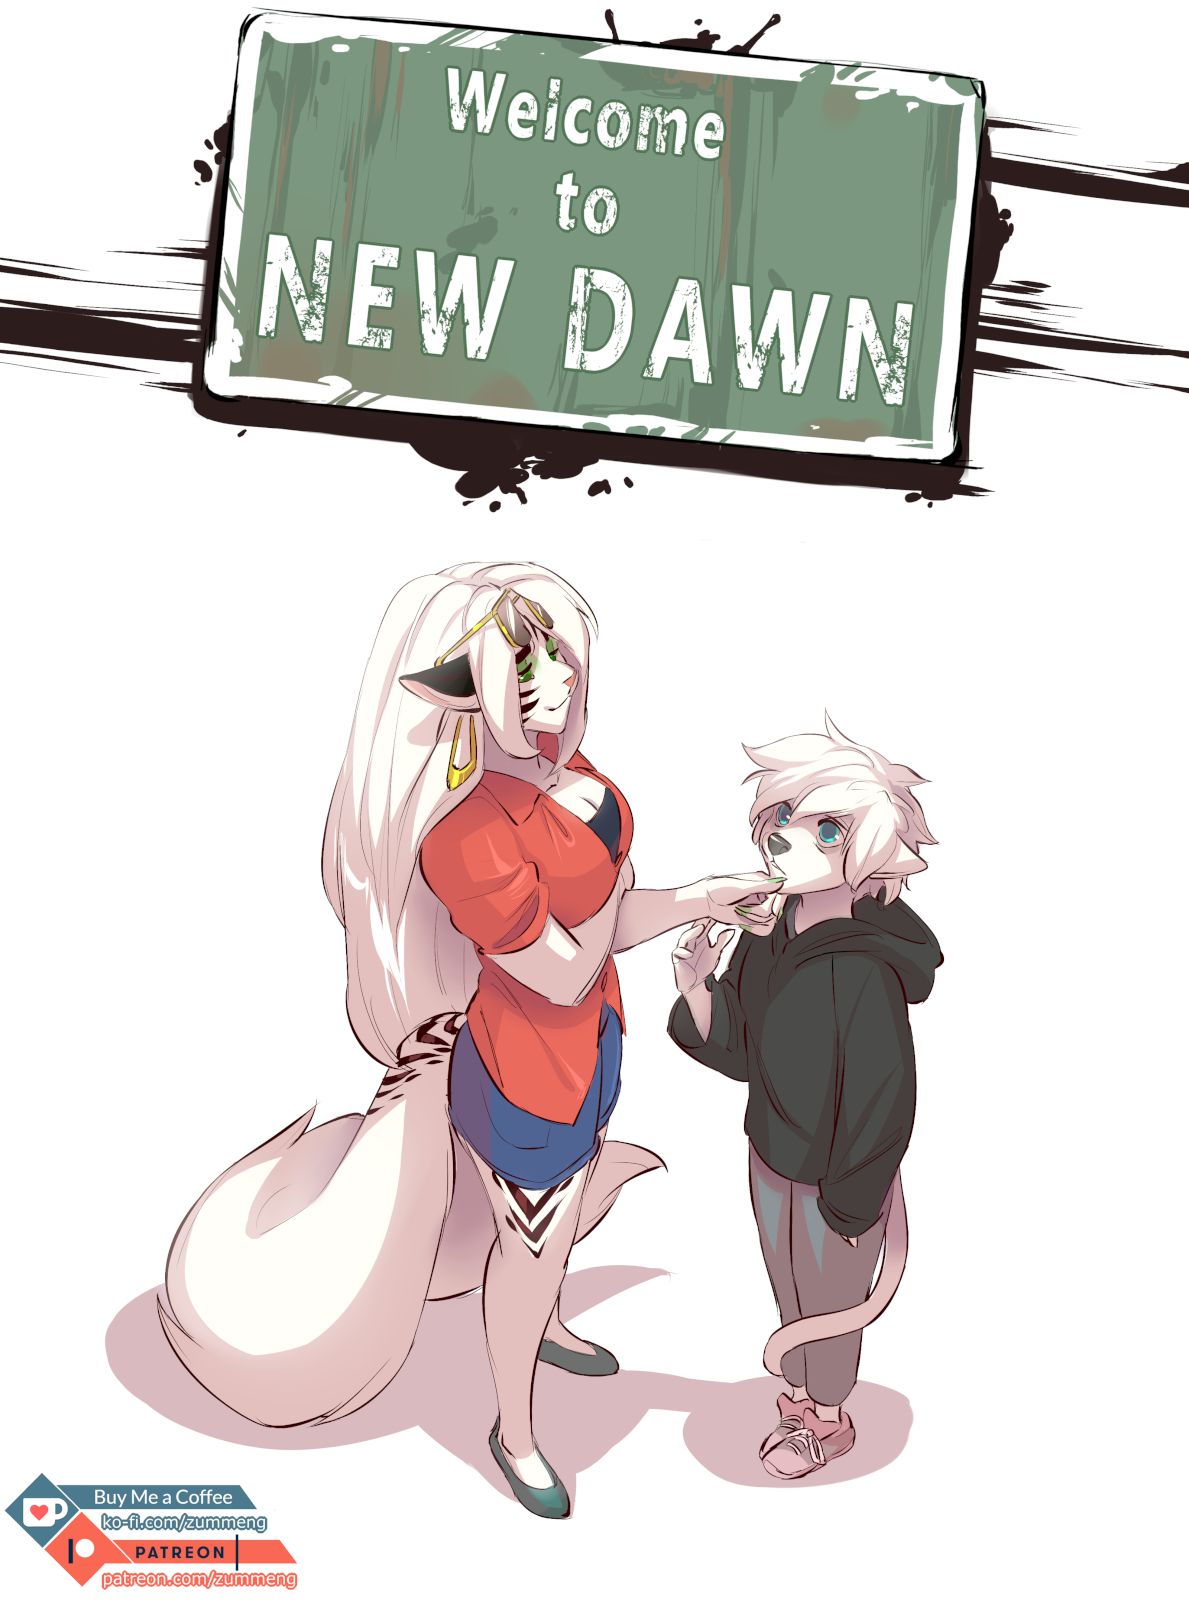 [Zummeng] Welcome to New Dawn [Ongoing] 25